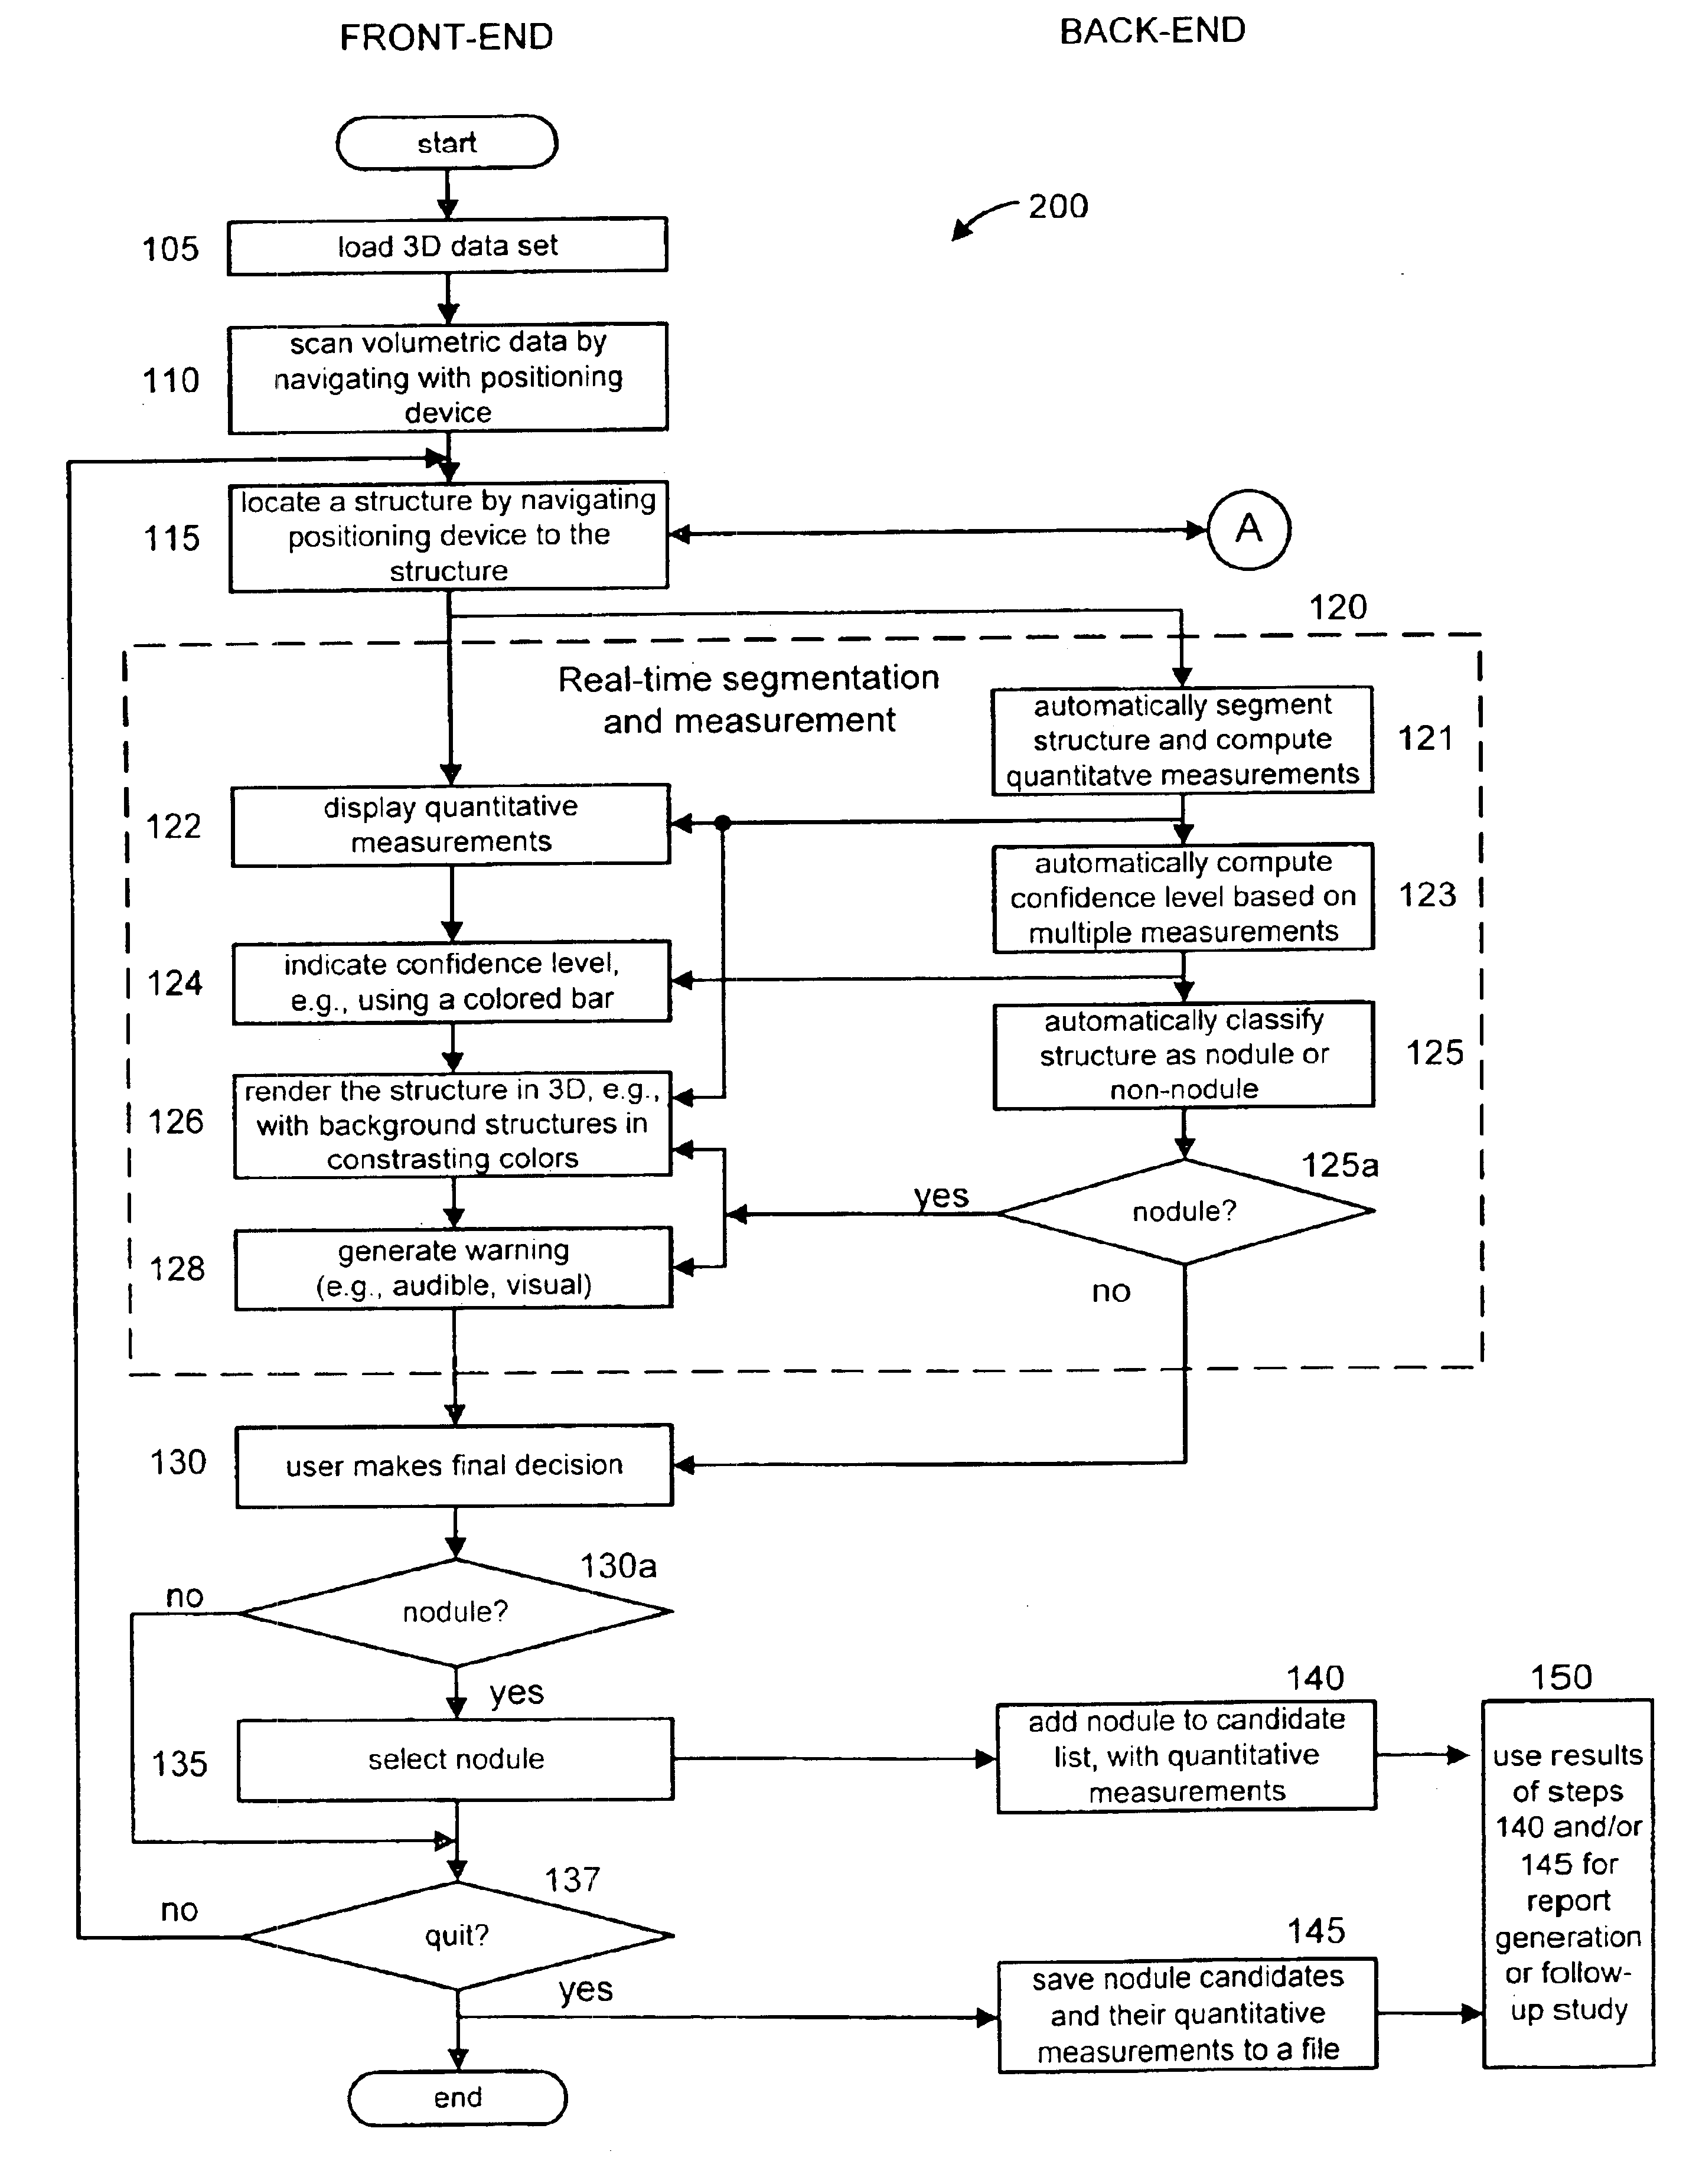 Interactive computer-aided diagnosis method and system for assisting diagnosis of lung nodules in digital volumetric medical images